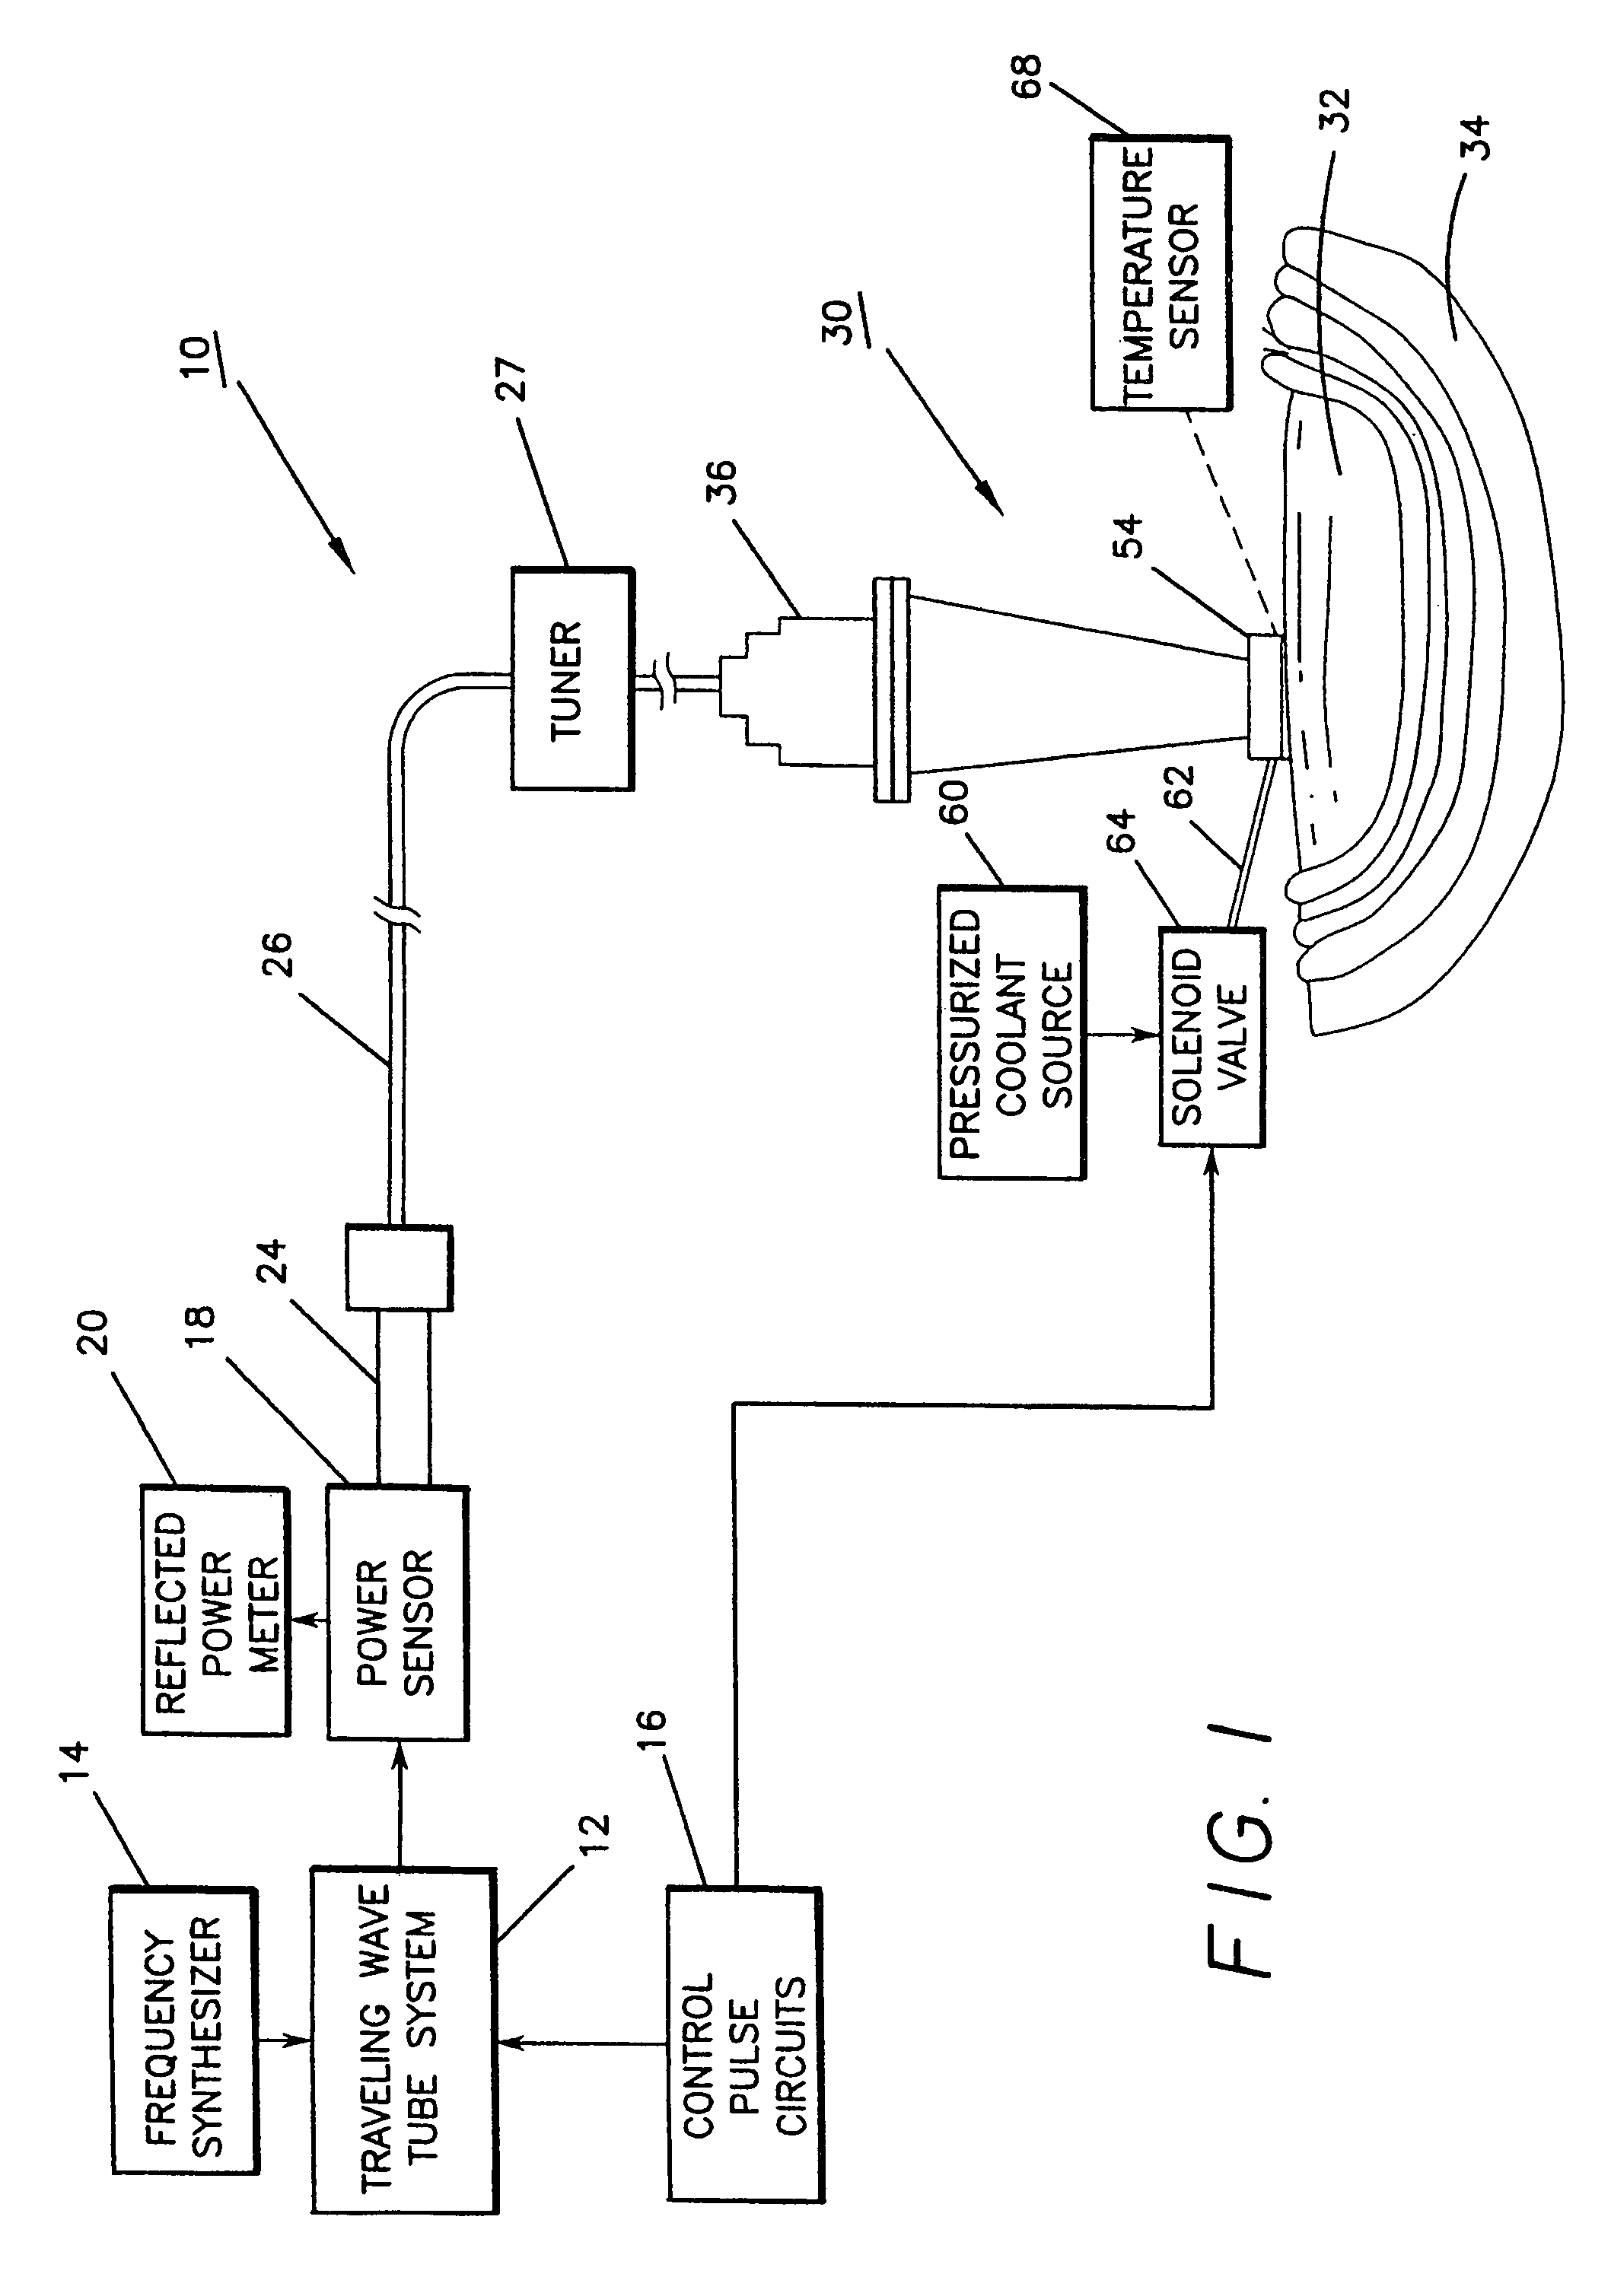 Method and apparatus for treating subcutaneous histological features